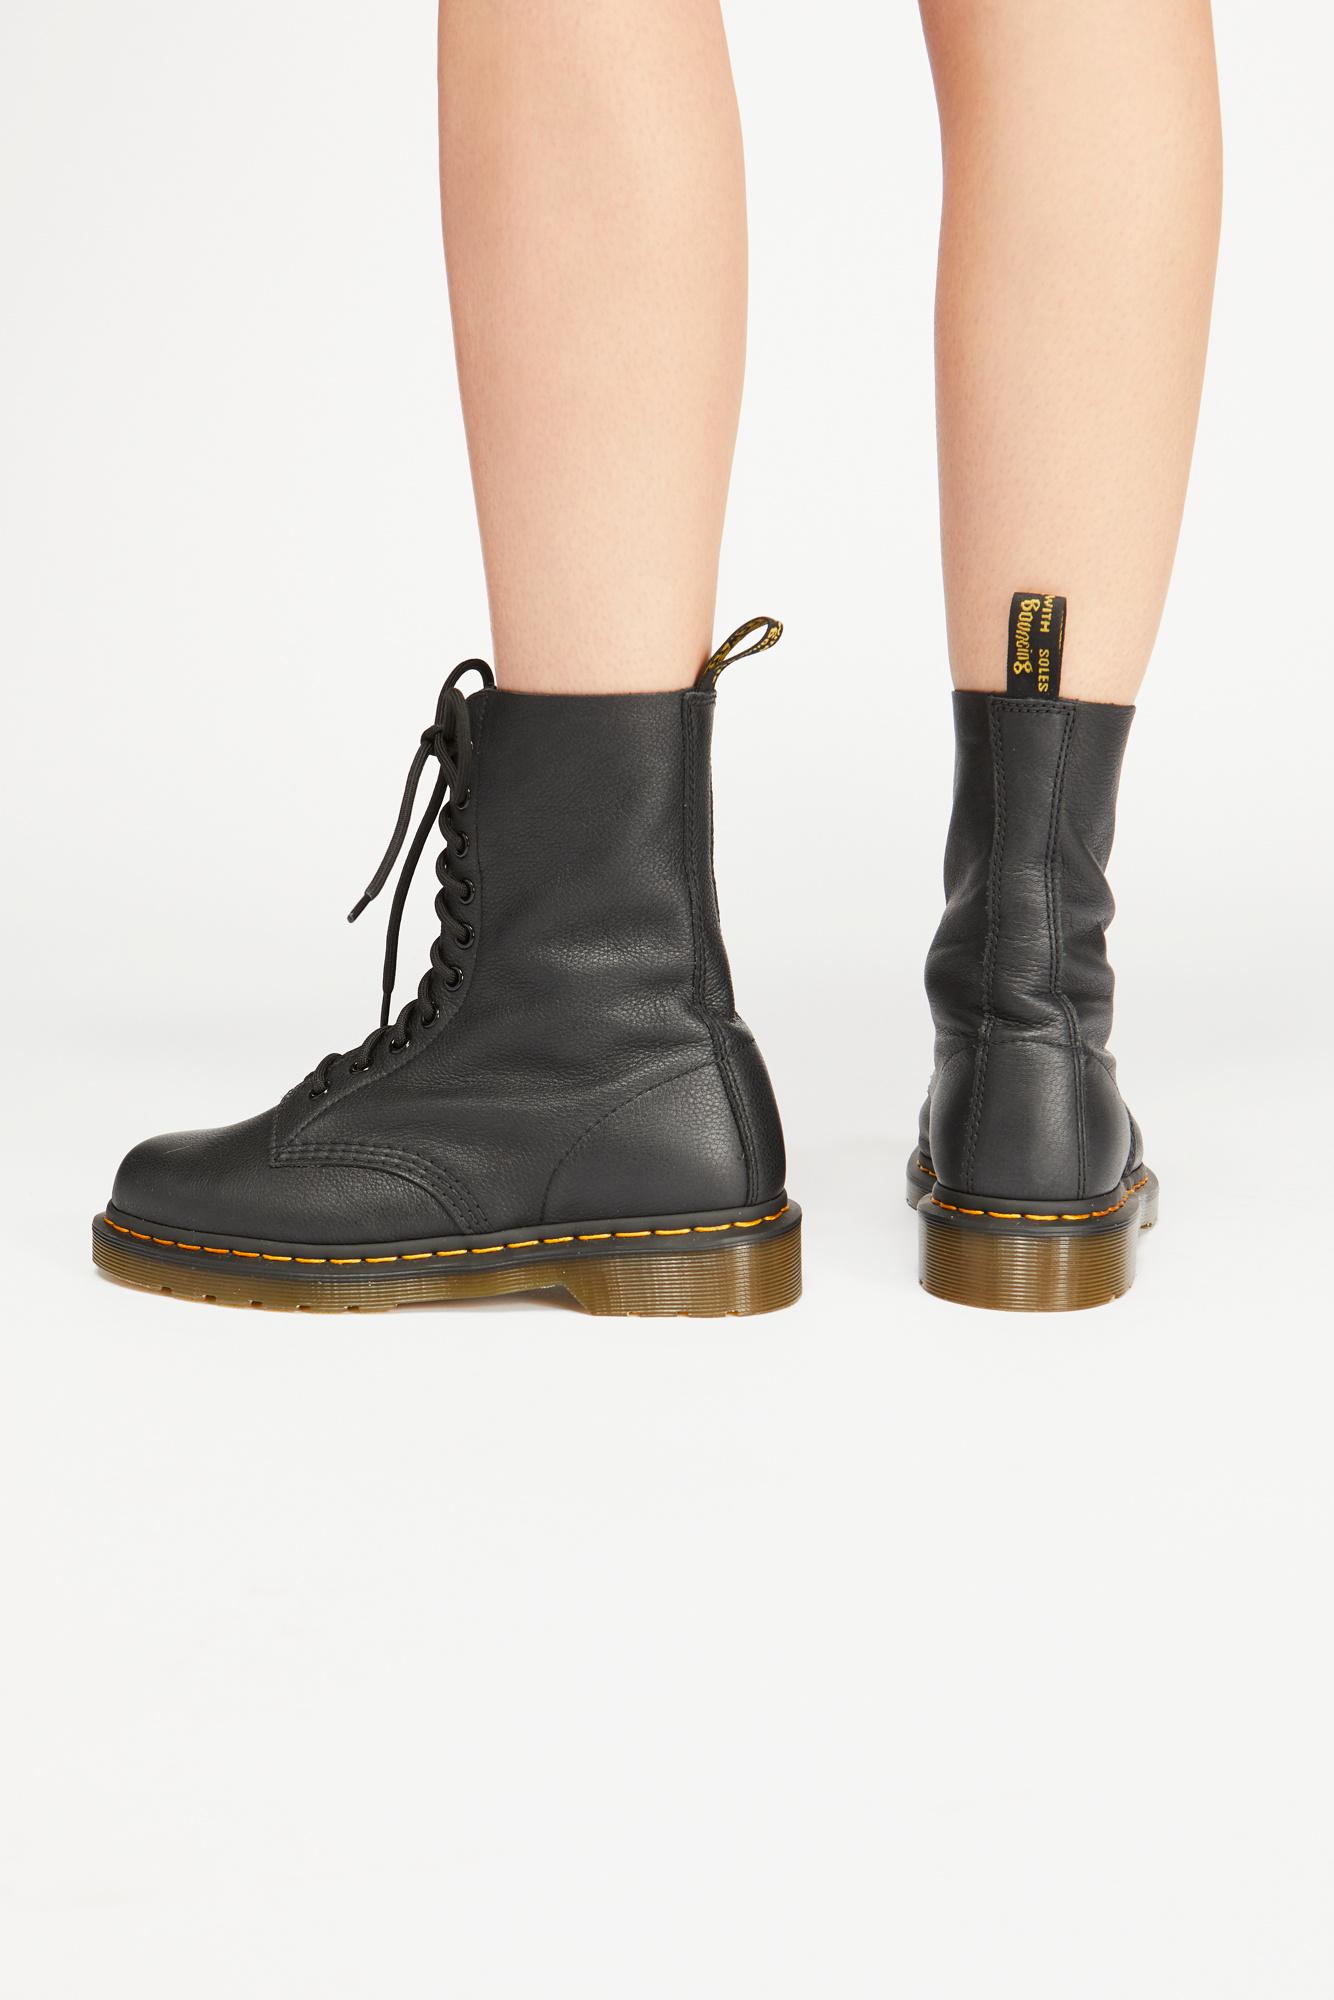 Free People Leather Dr. Martens 1490 10 Eye Lace-up Boot in Black - Lyst